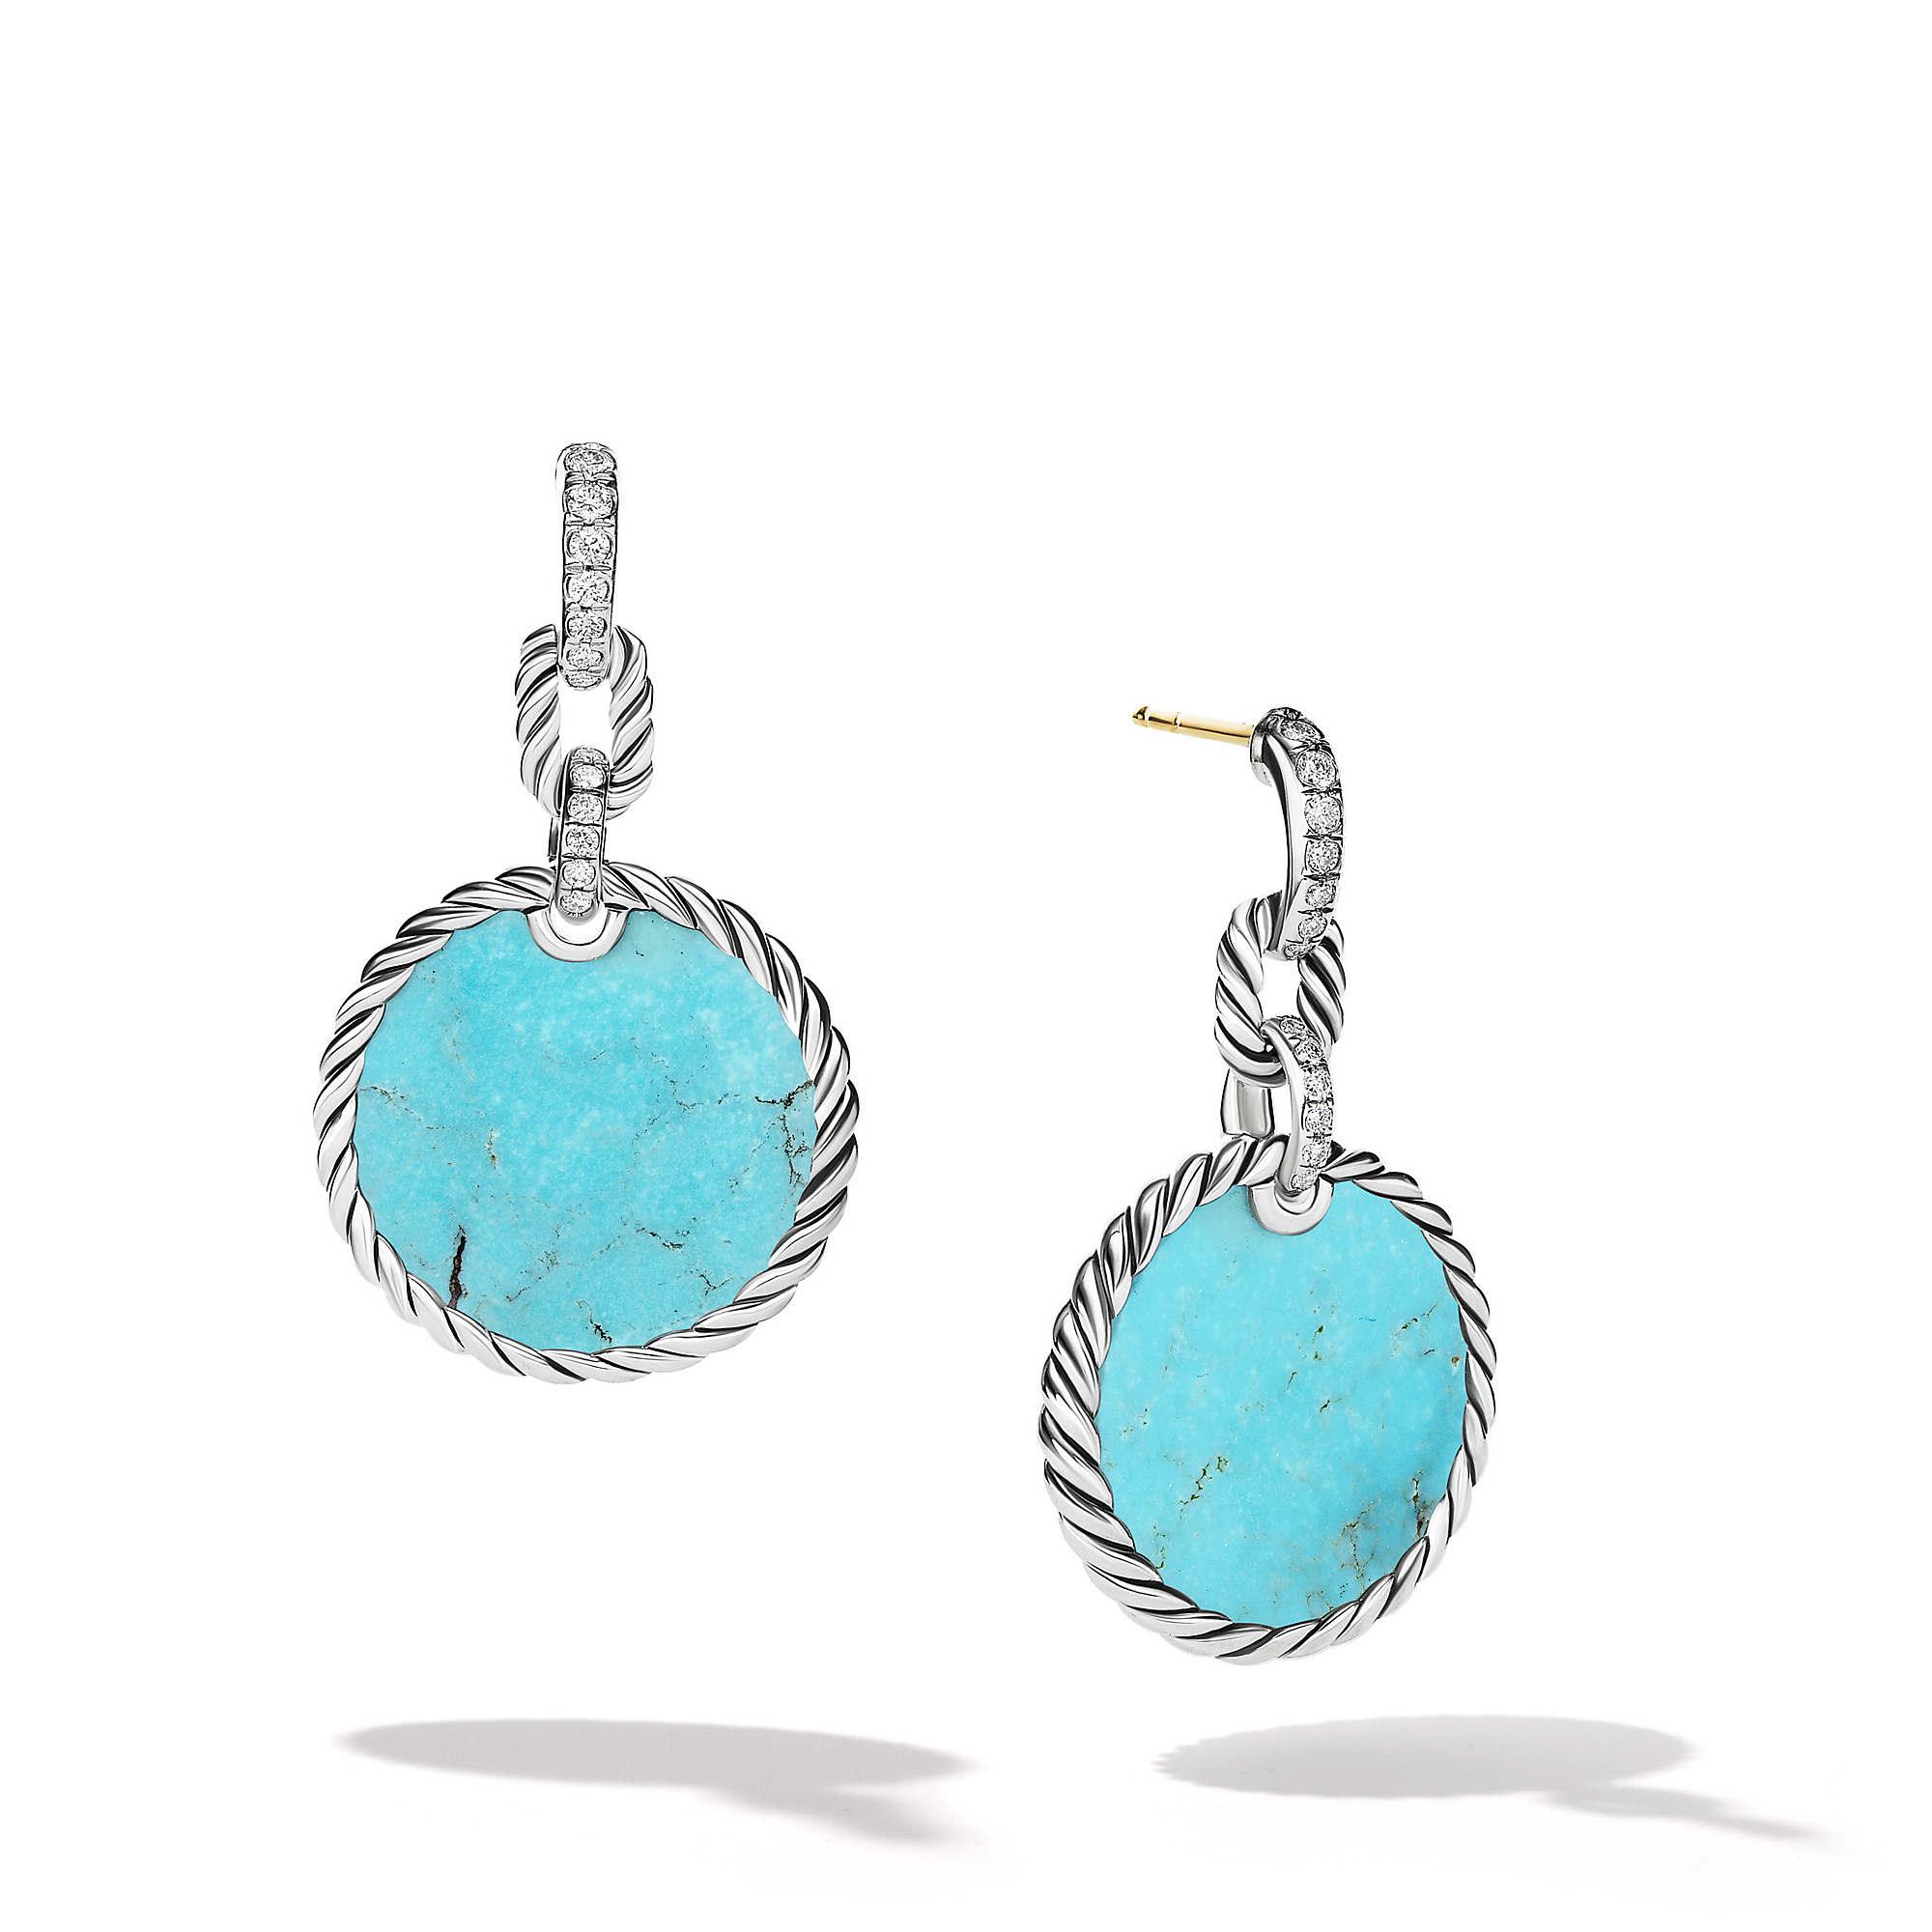 DY Elements® Convertible Drop Earrings with Turquoise and Pave Diamonds